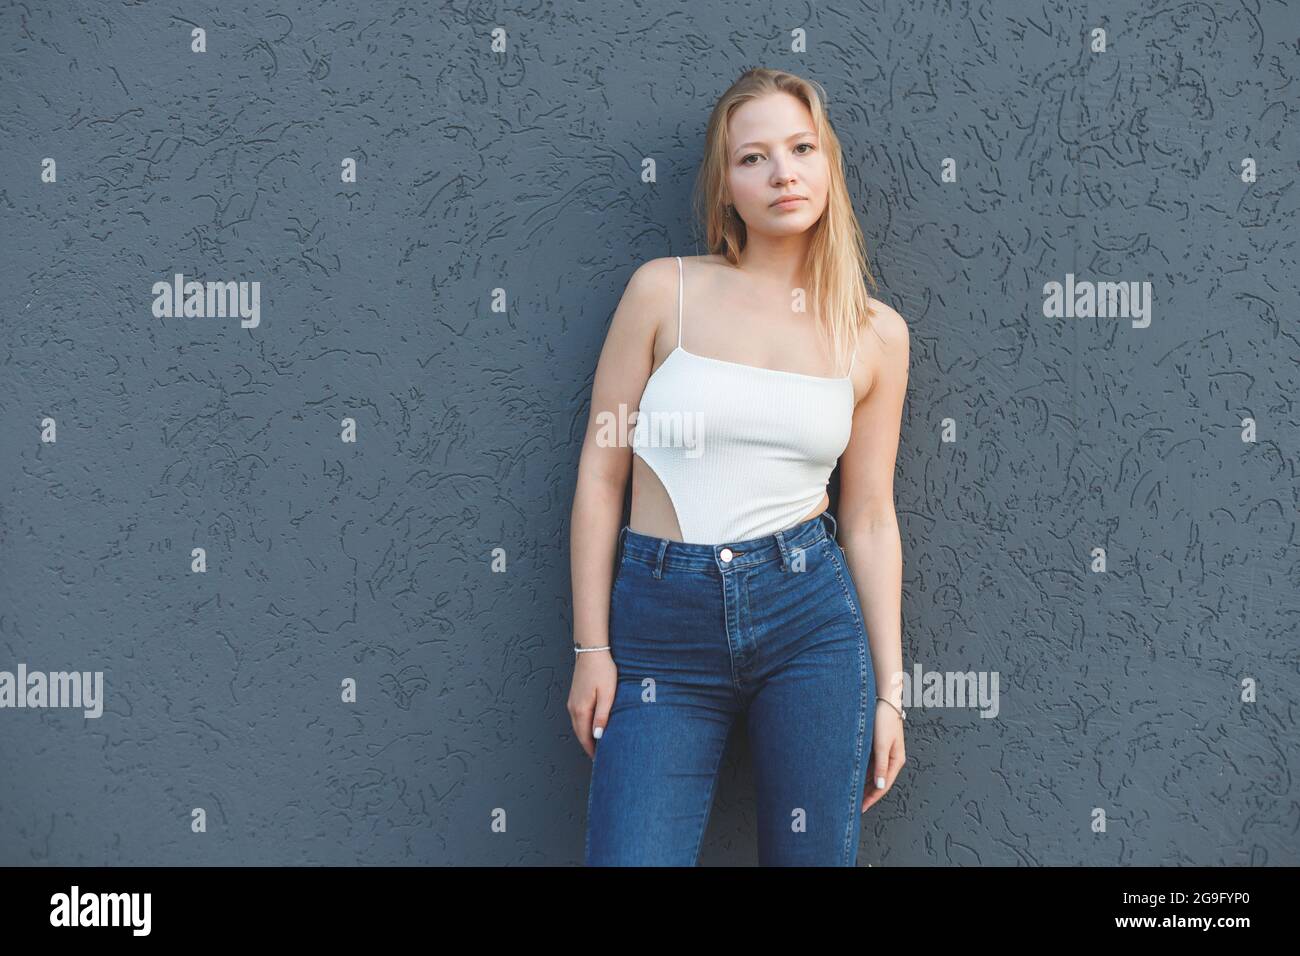 young blonde woman in the white sleeveless t-shirt and blue jeans standing over gray wall background Stock Photo